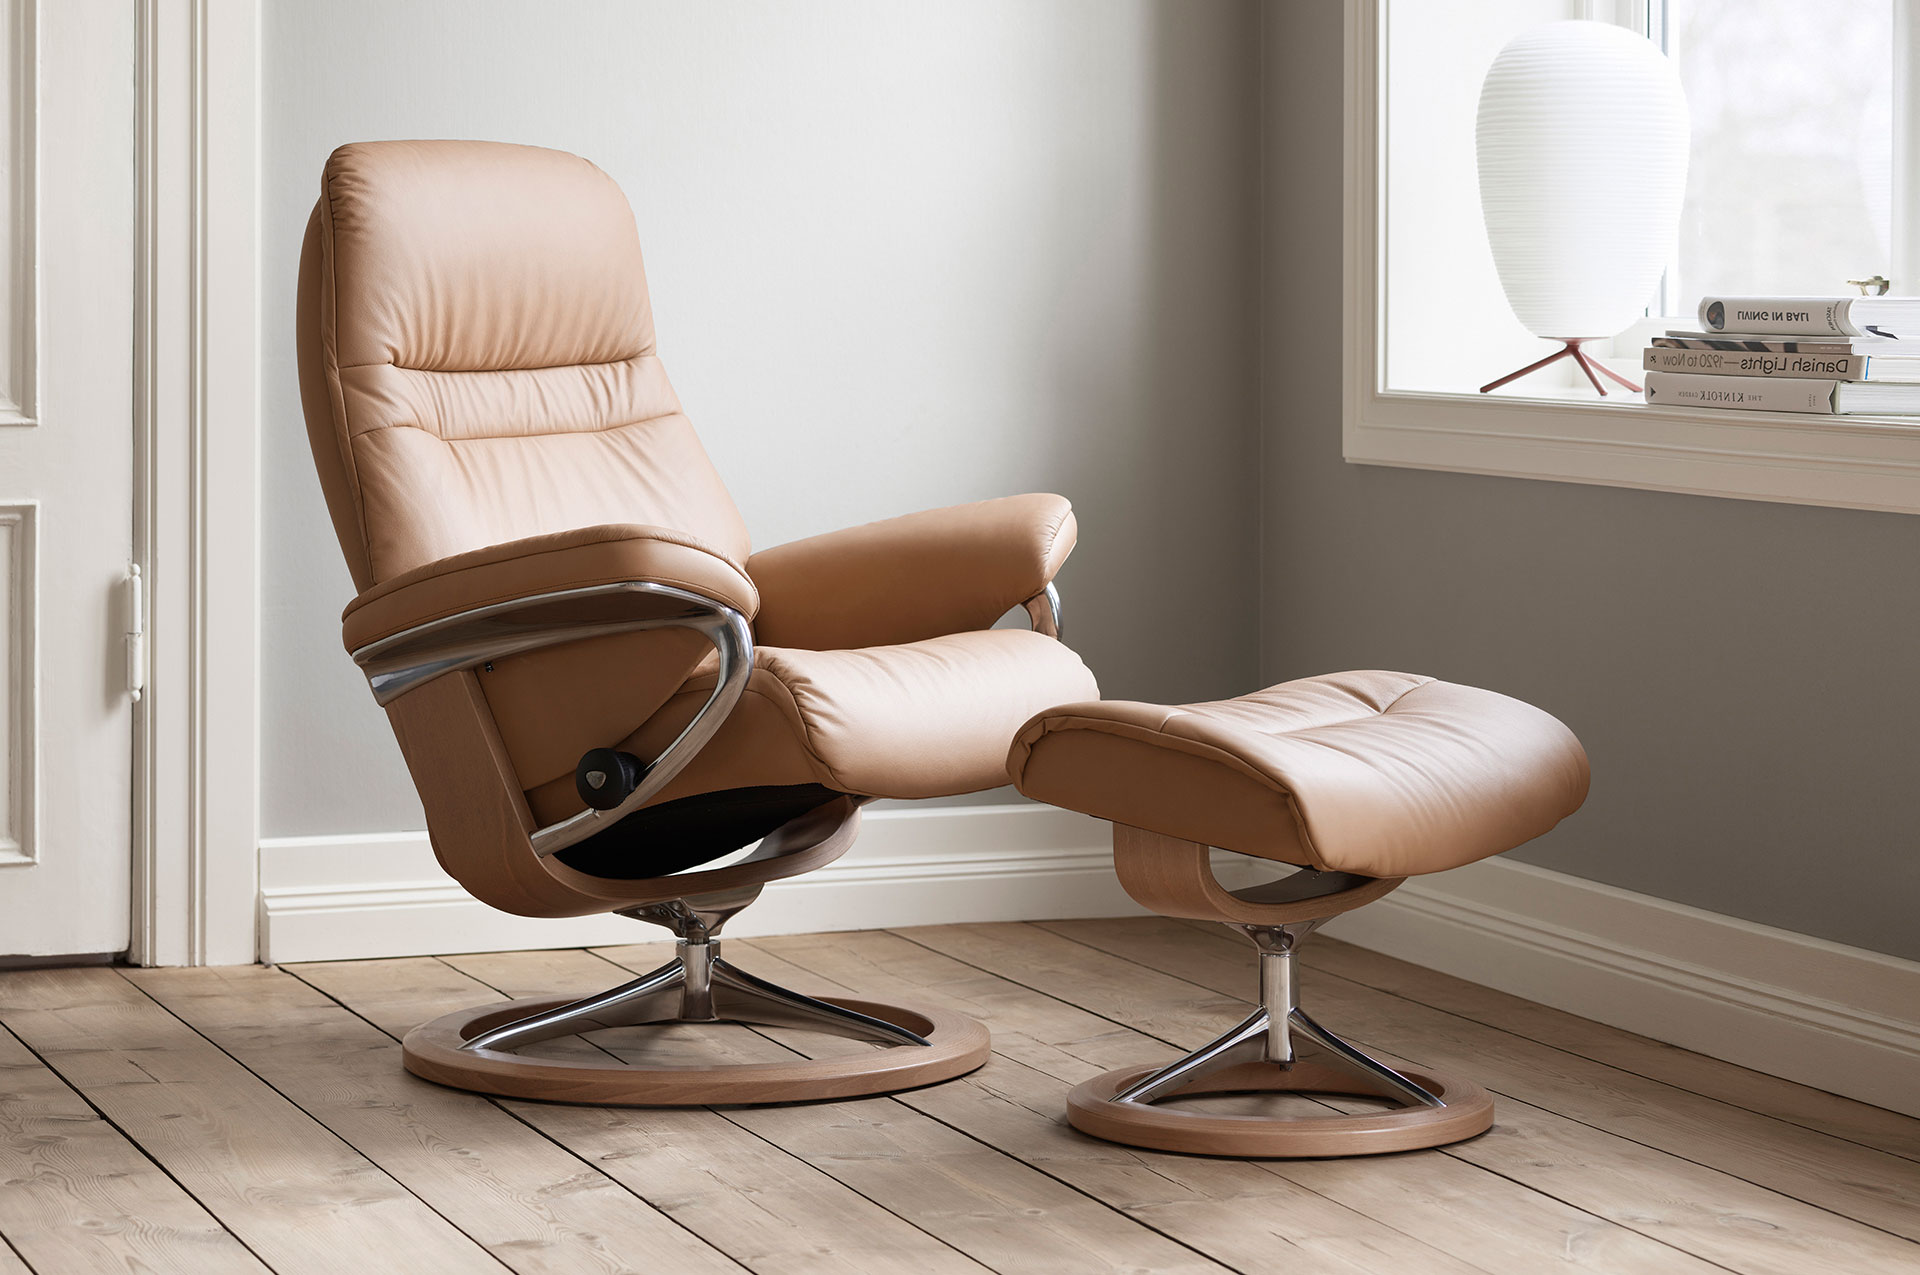 Fauteuil relax Stressless occasion actions prix Valais